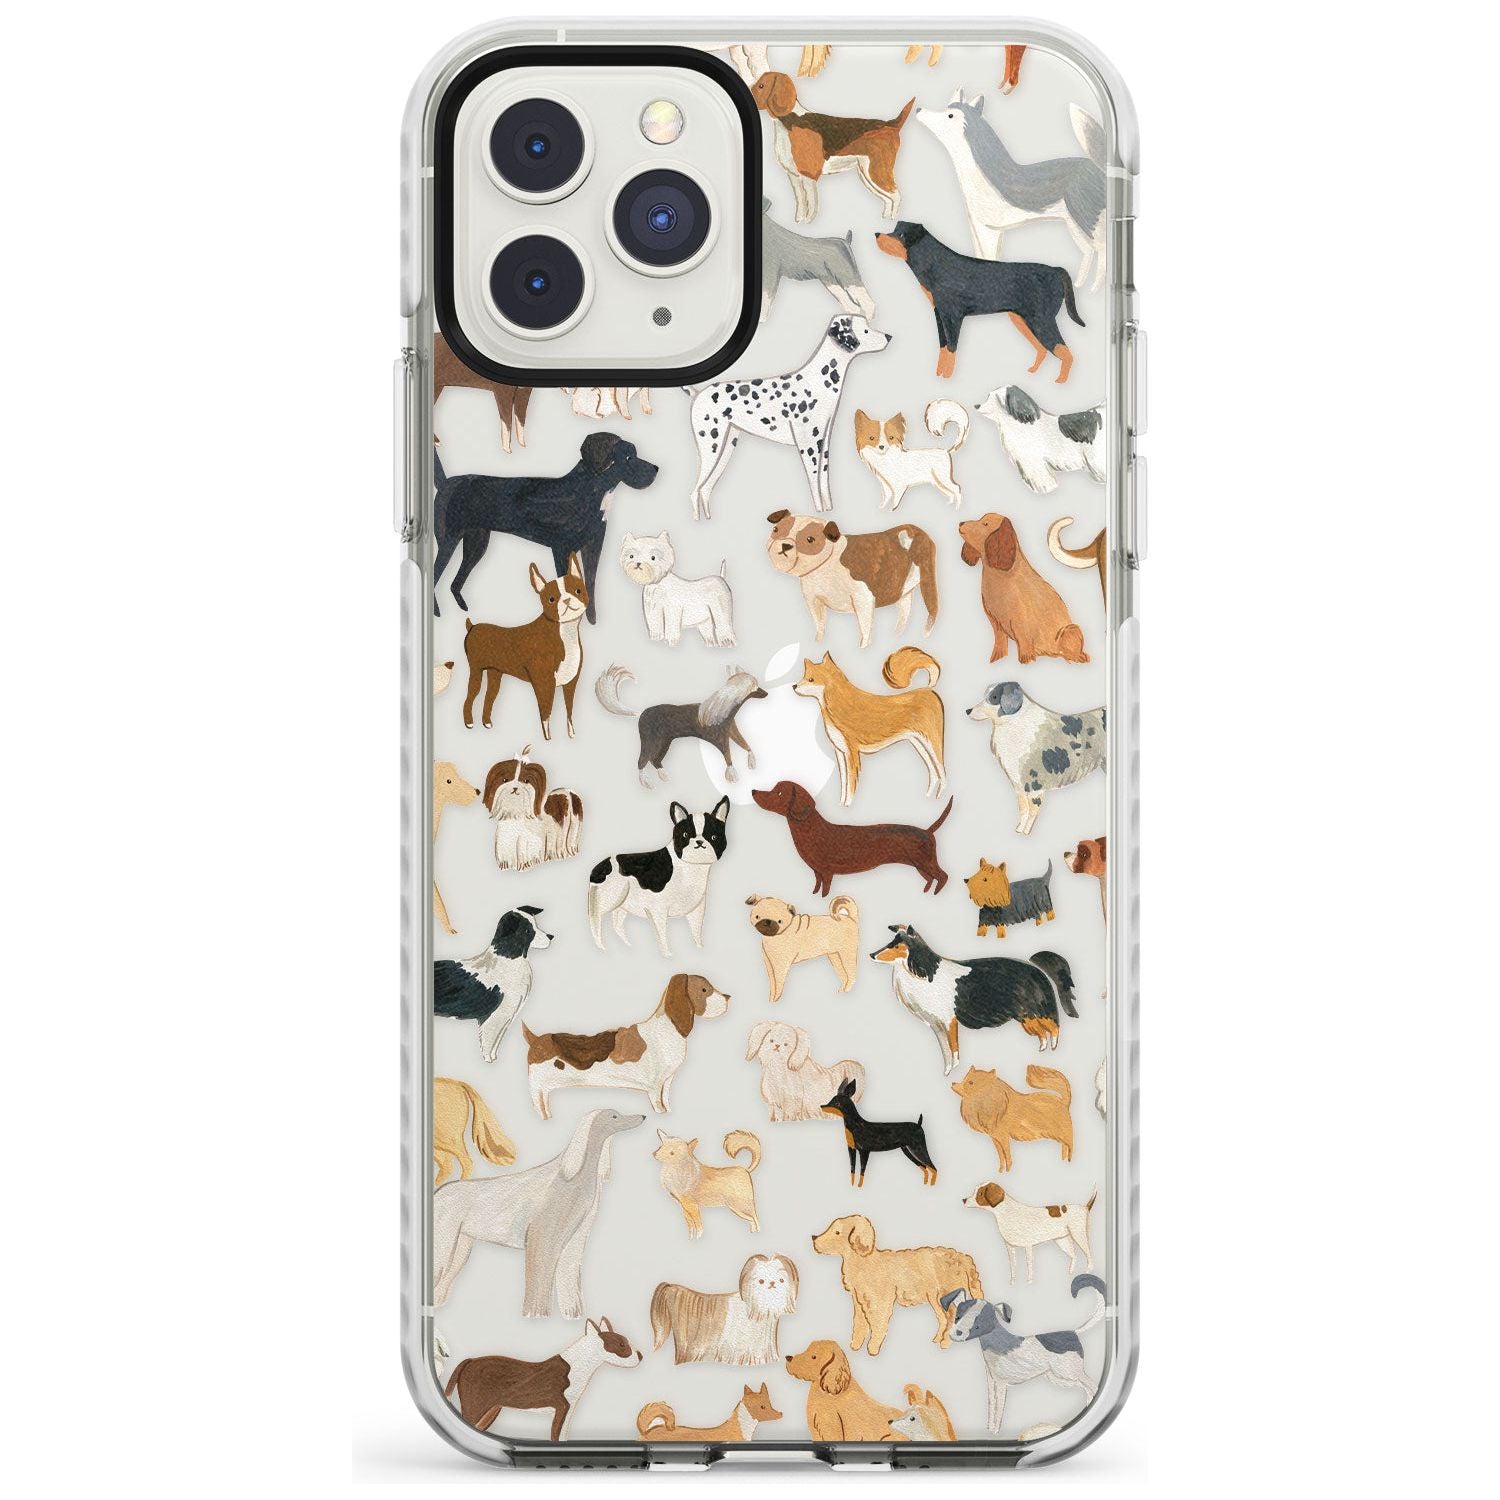 Hand Painted Dogs Impact Phone Case for iPhone 11 Pro Max